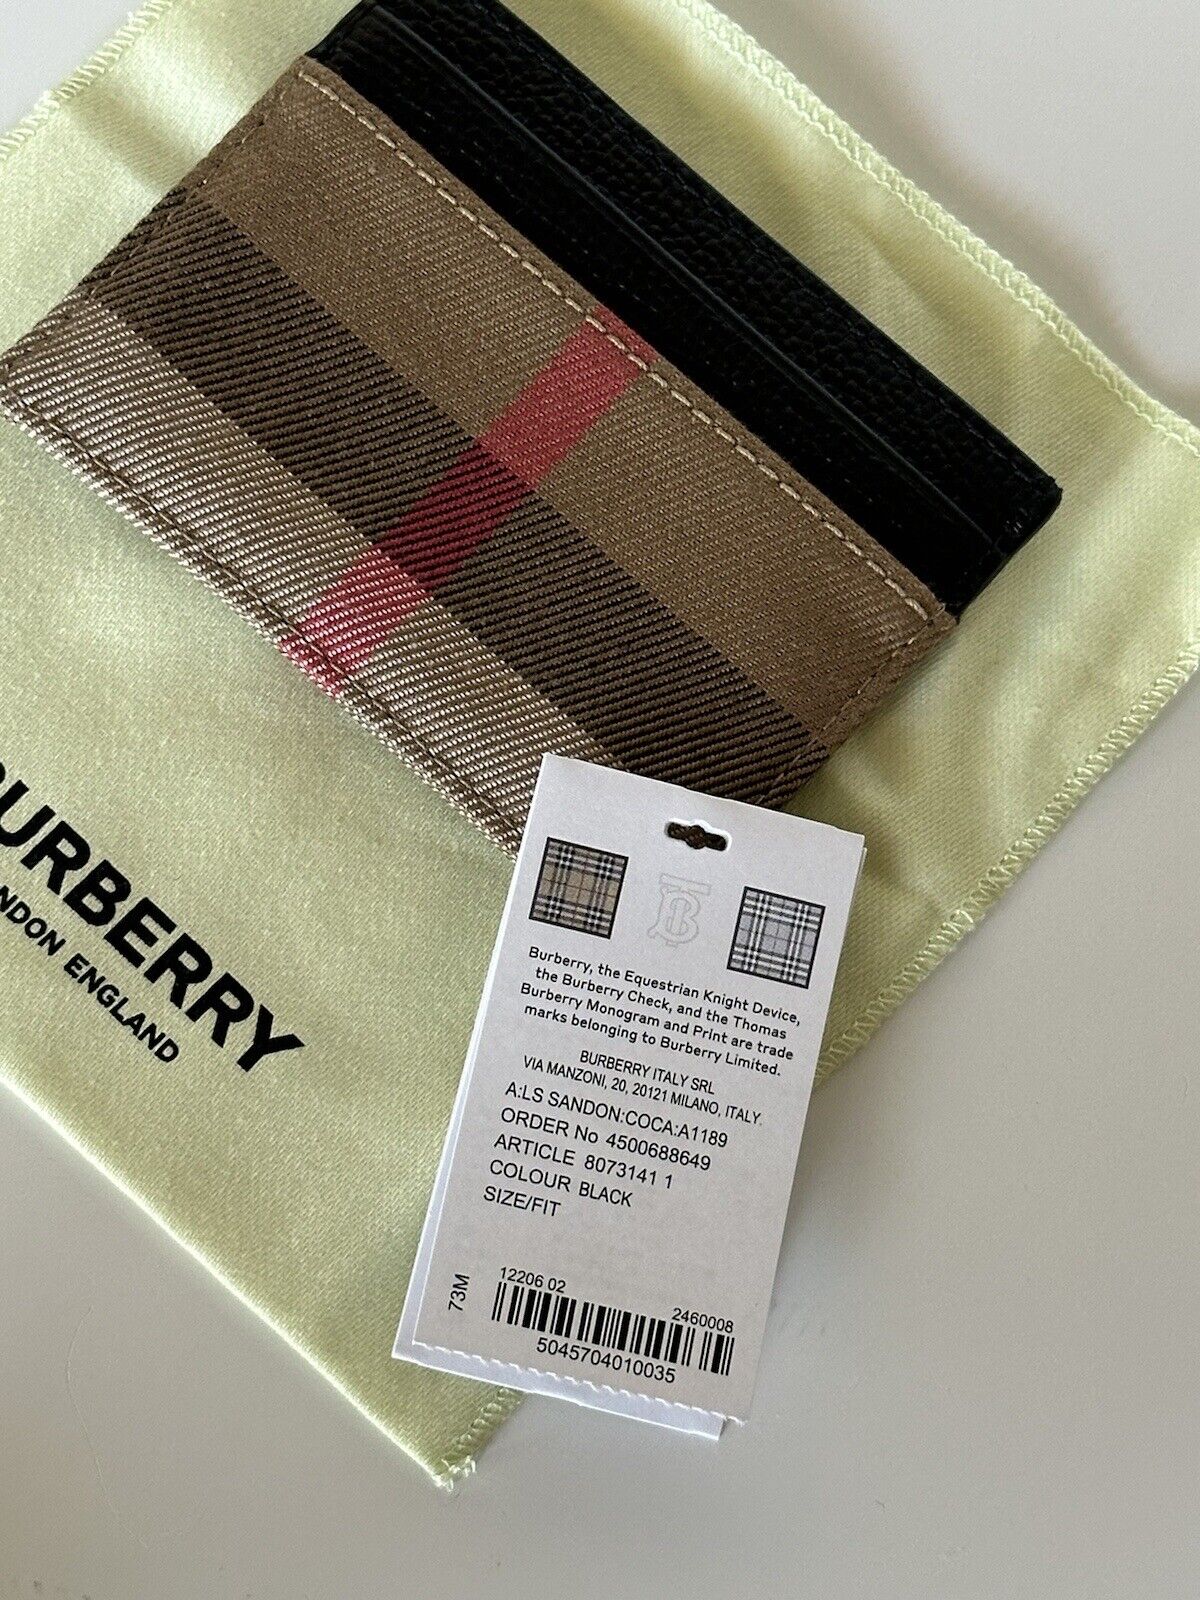 NWT $260 Burberry Vintage Check Archive Beige/Black Leather Card Case 80731411